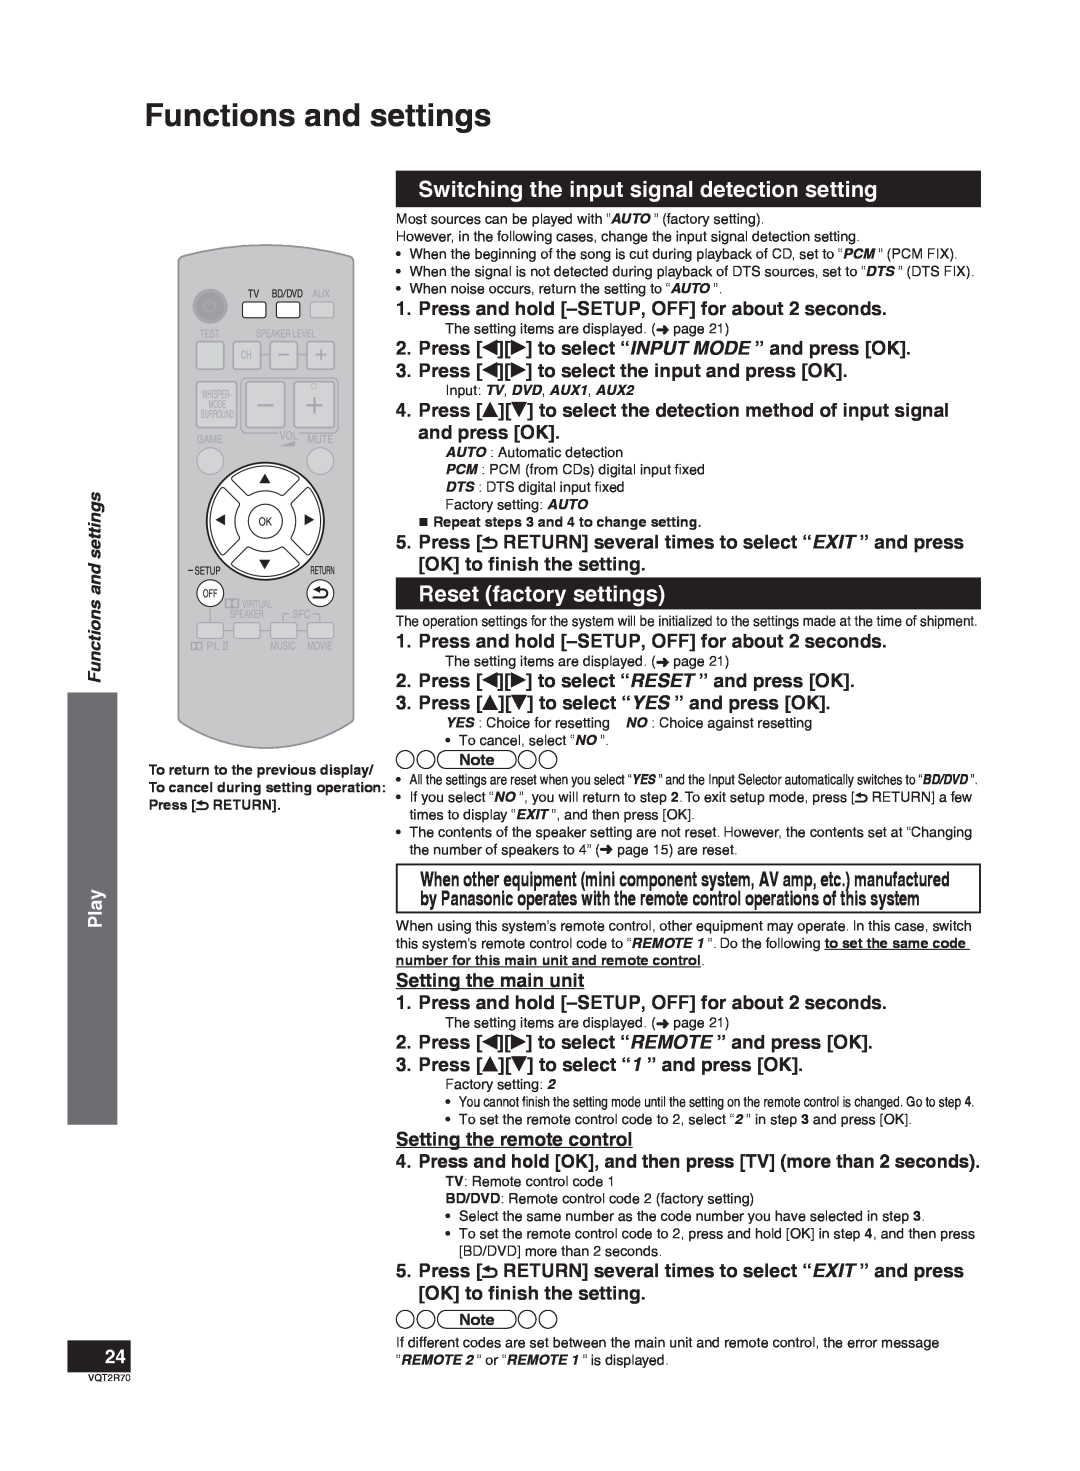 Panasonic SC-ZT2 Switching the input signal detection setting, Reset factory settings, Play, Functions and settings 